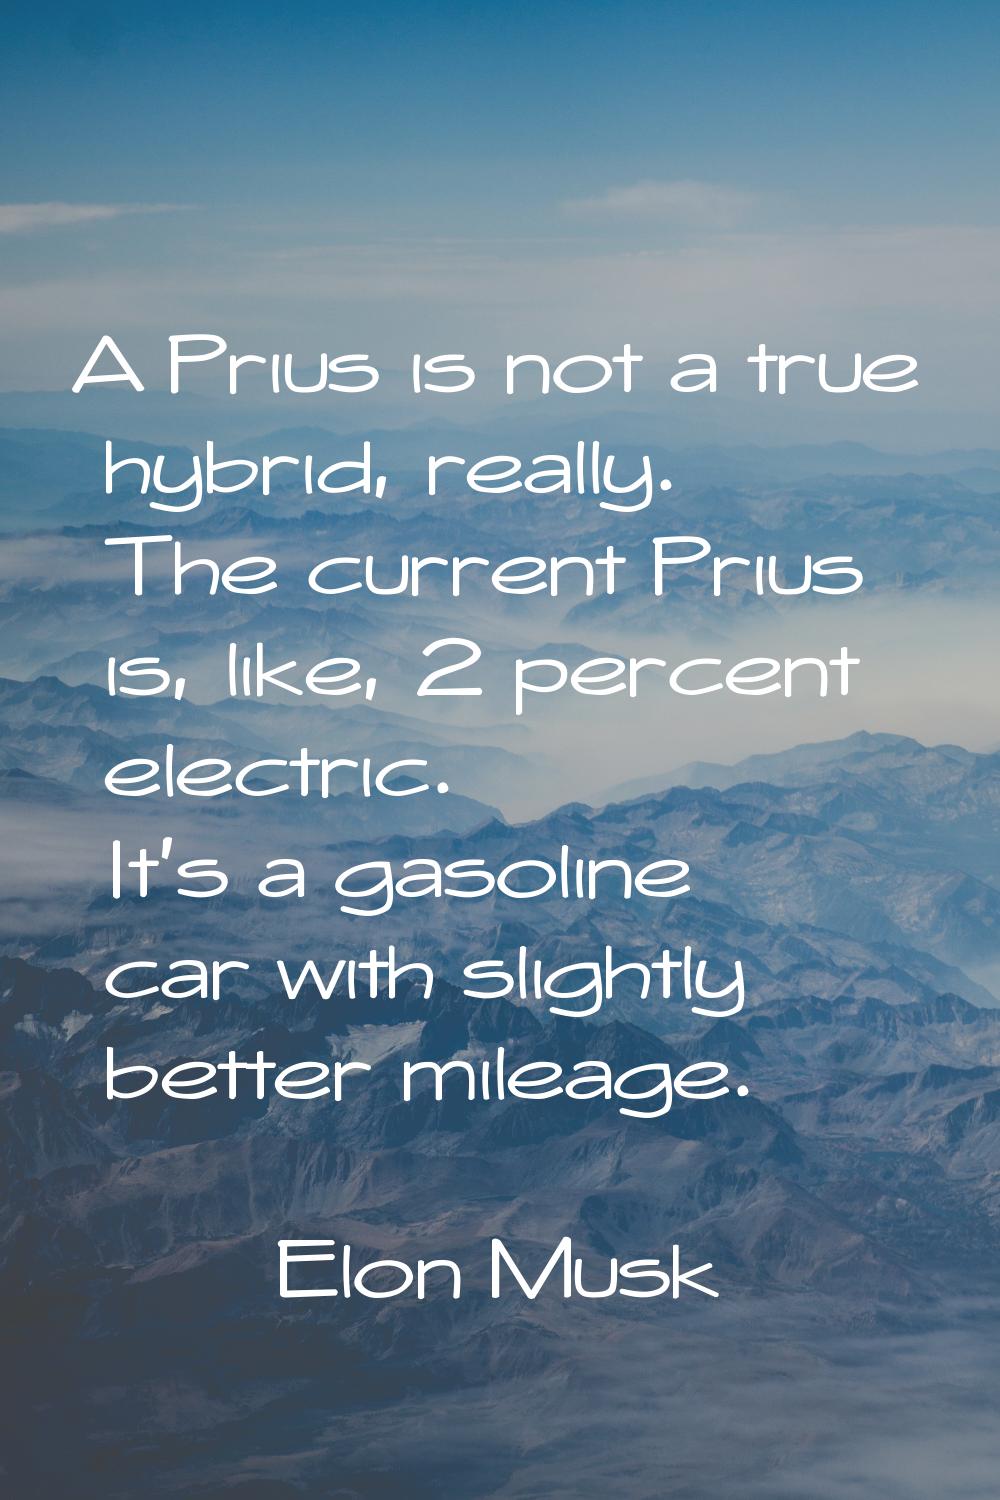 A Prius is not a true hybrid, really. The current Prius is, like, 2 percent electric. It's a gasoli